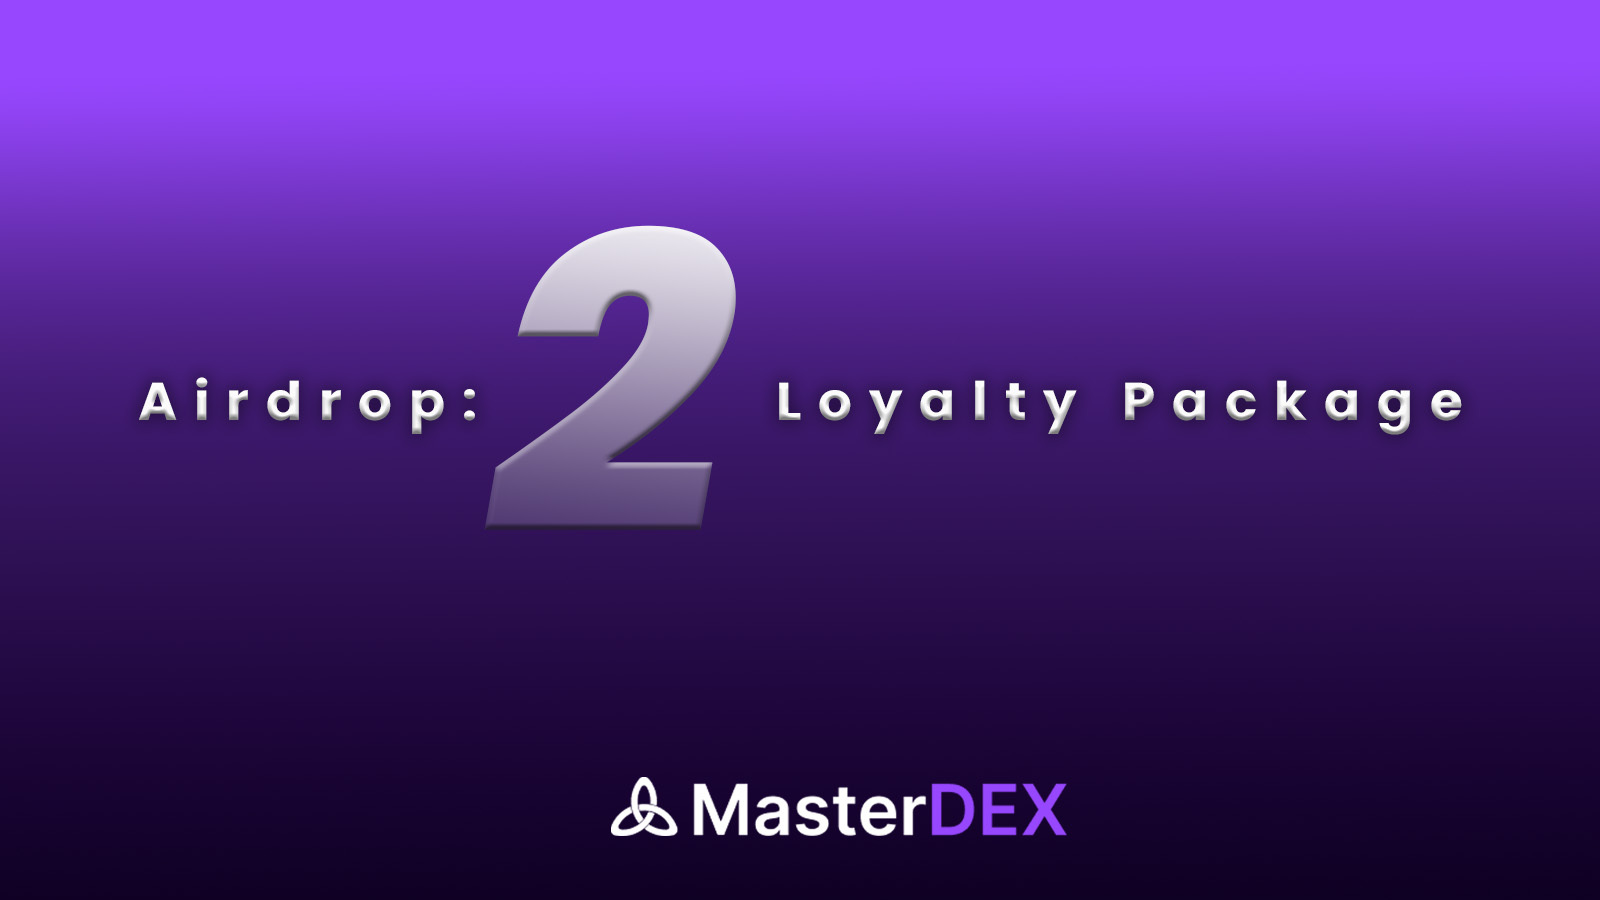 Airdrop: 36 Million MDEX Second Loyalty Package